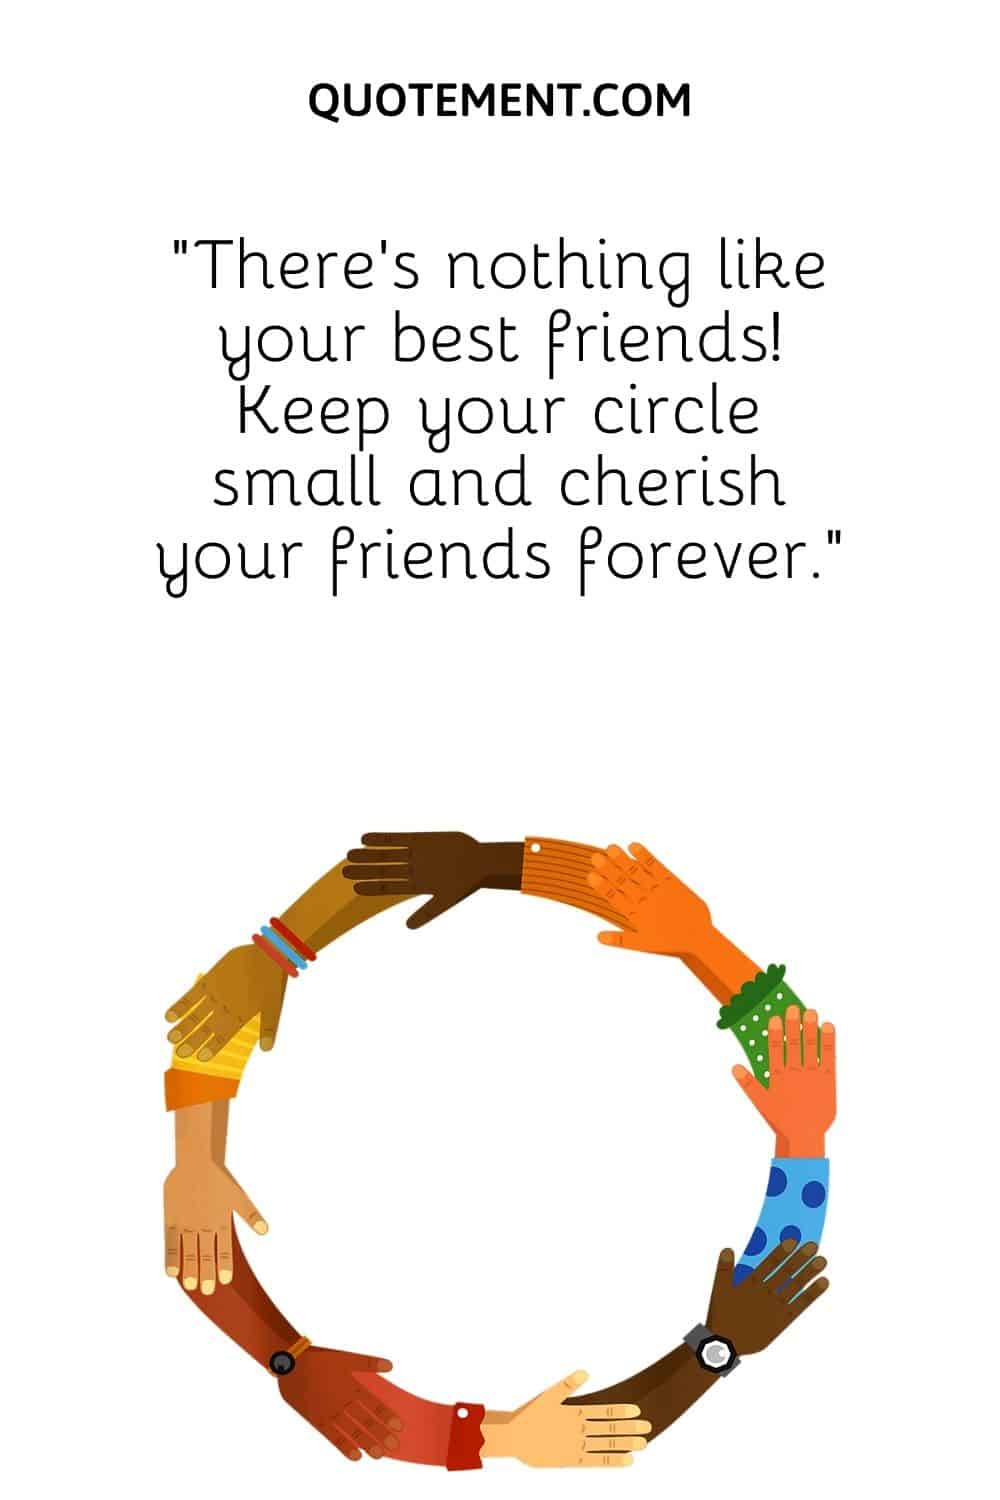 “There’s nothing like your best friends! Keep your circle small and cherish your friends forever.”